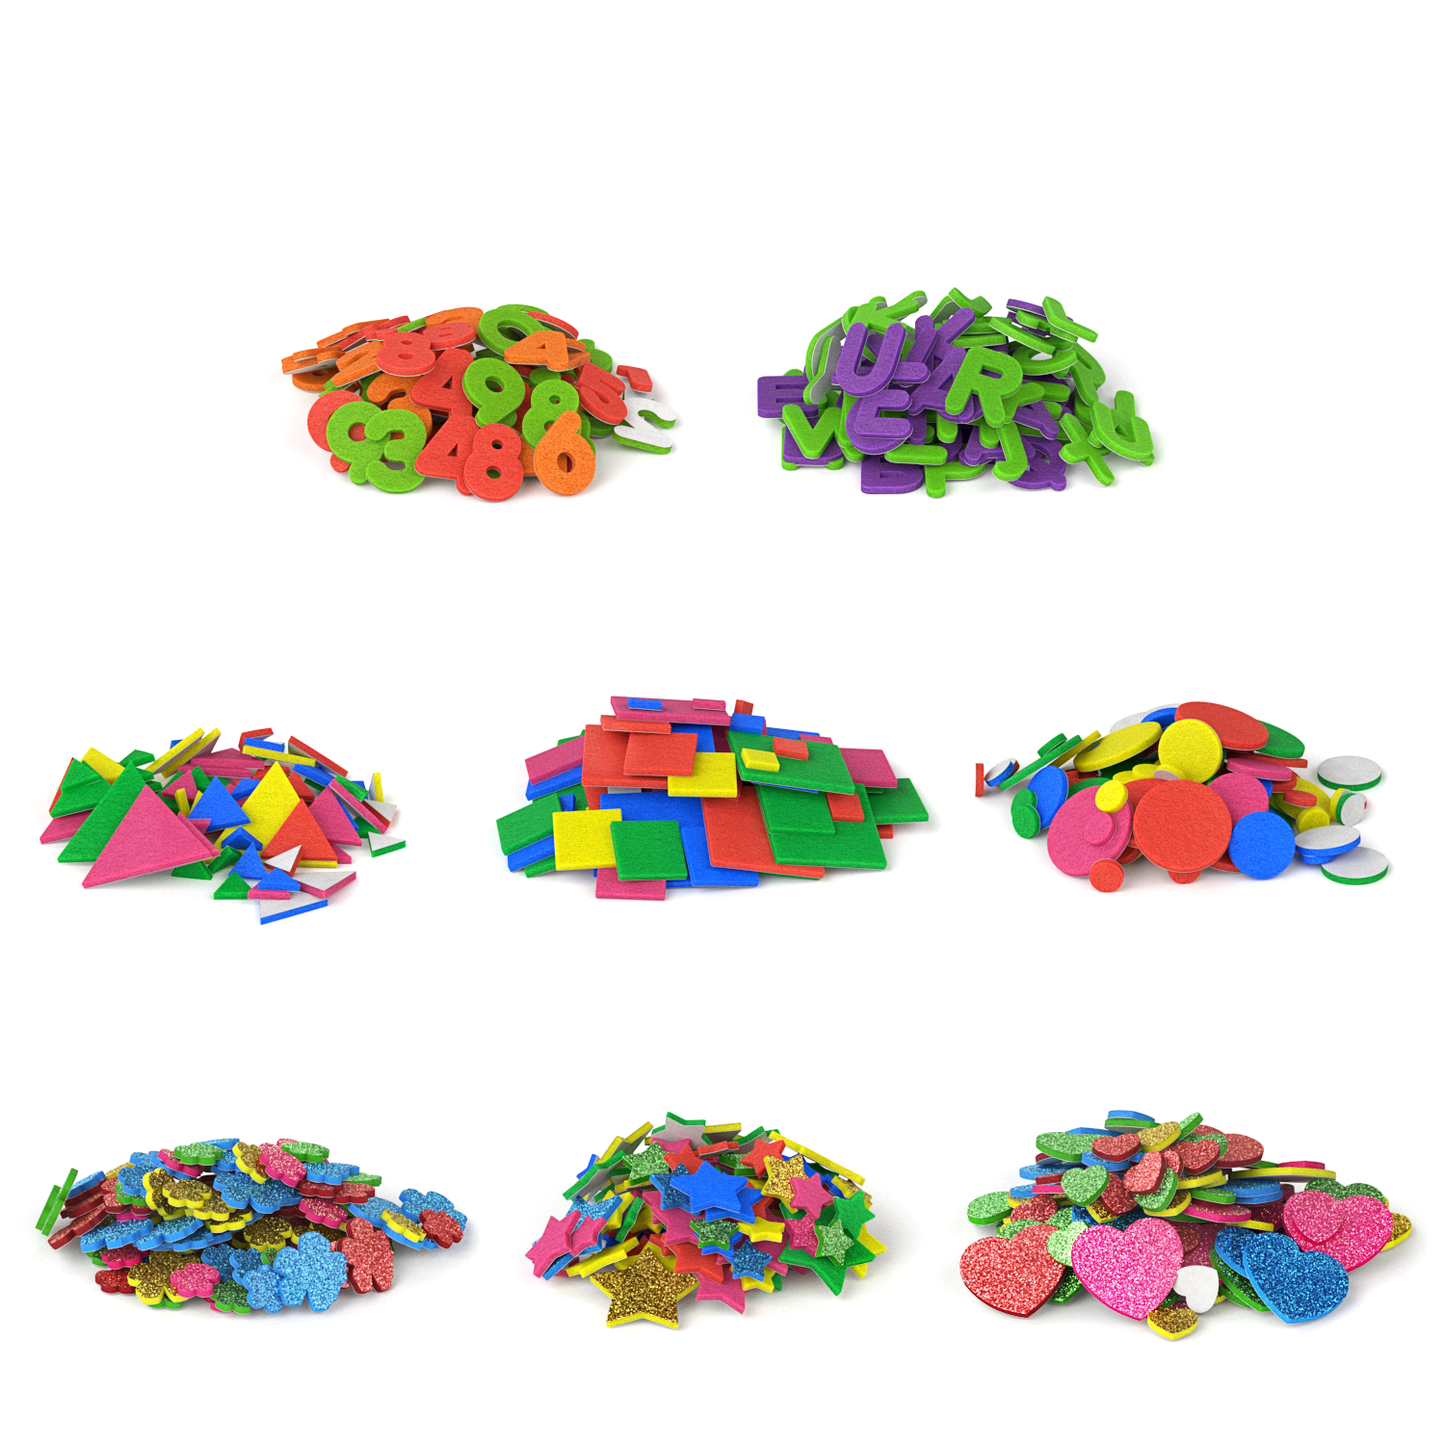 Foam Shapes, Self-Adhesive, 1000 Pieces